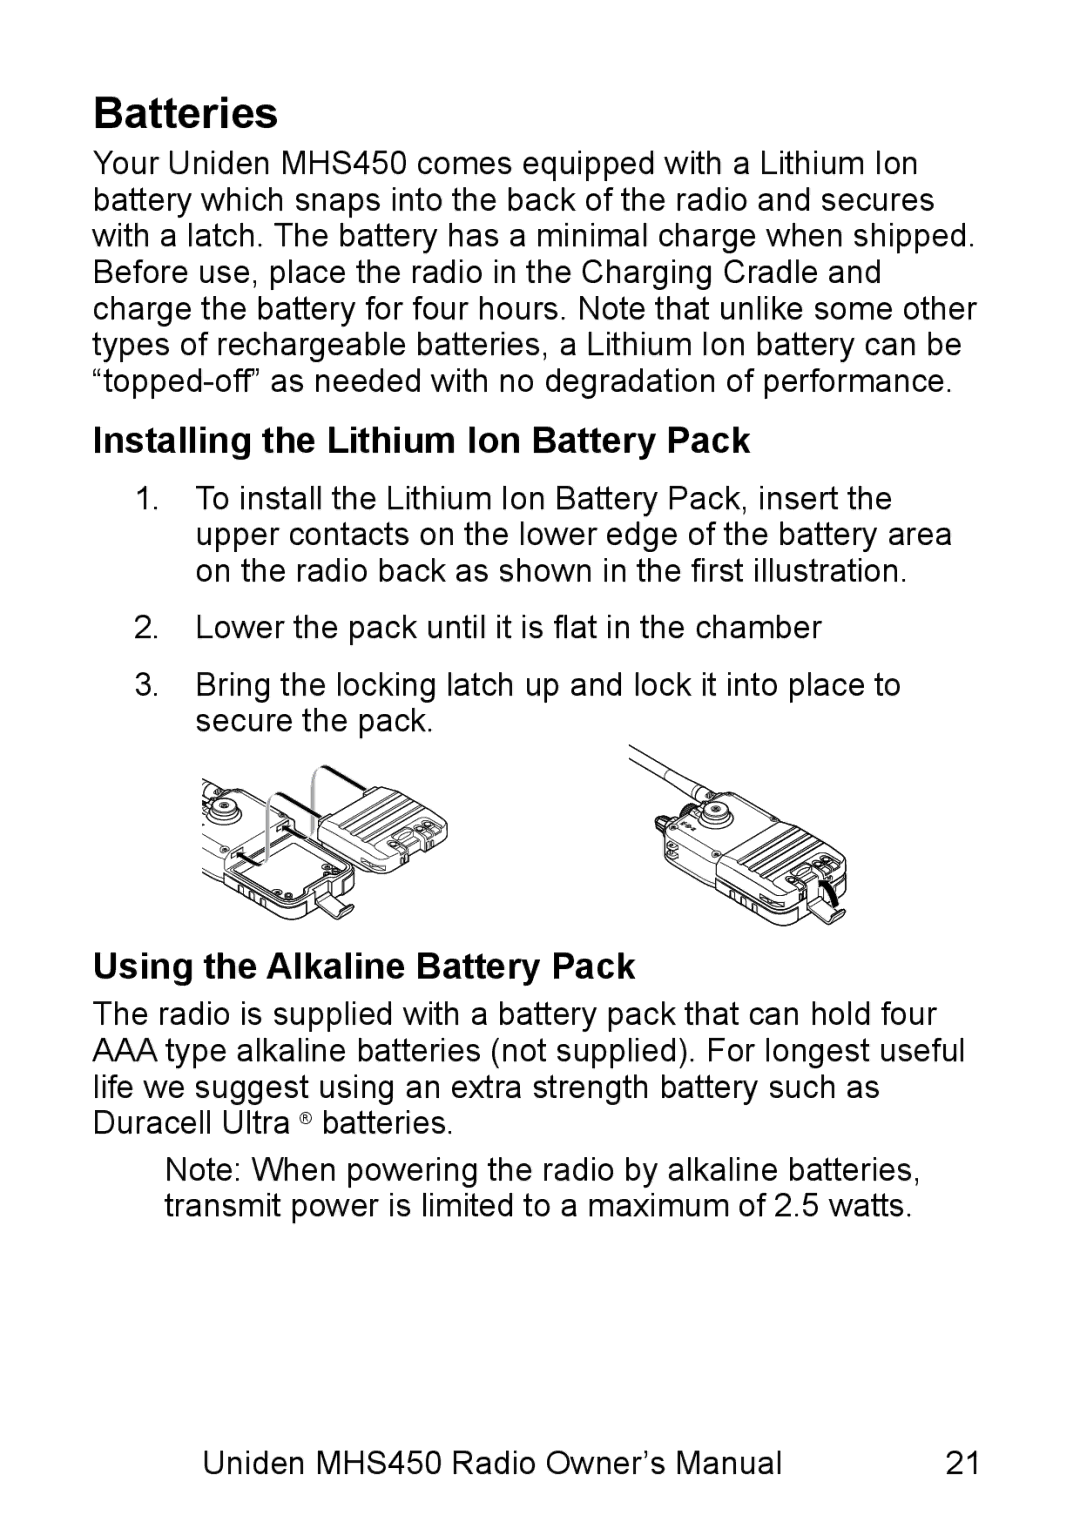 Uniden MHS450 owner manual Batteries, Installing the Lithium Ion Battery Pack 